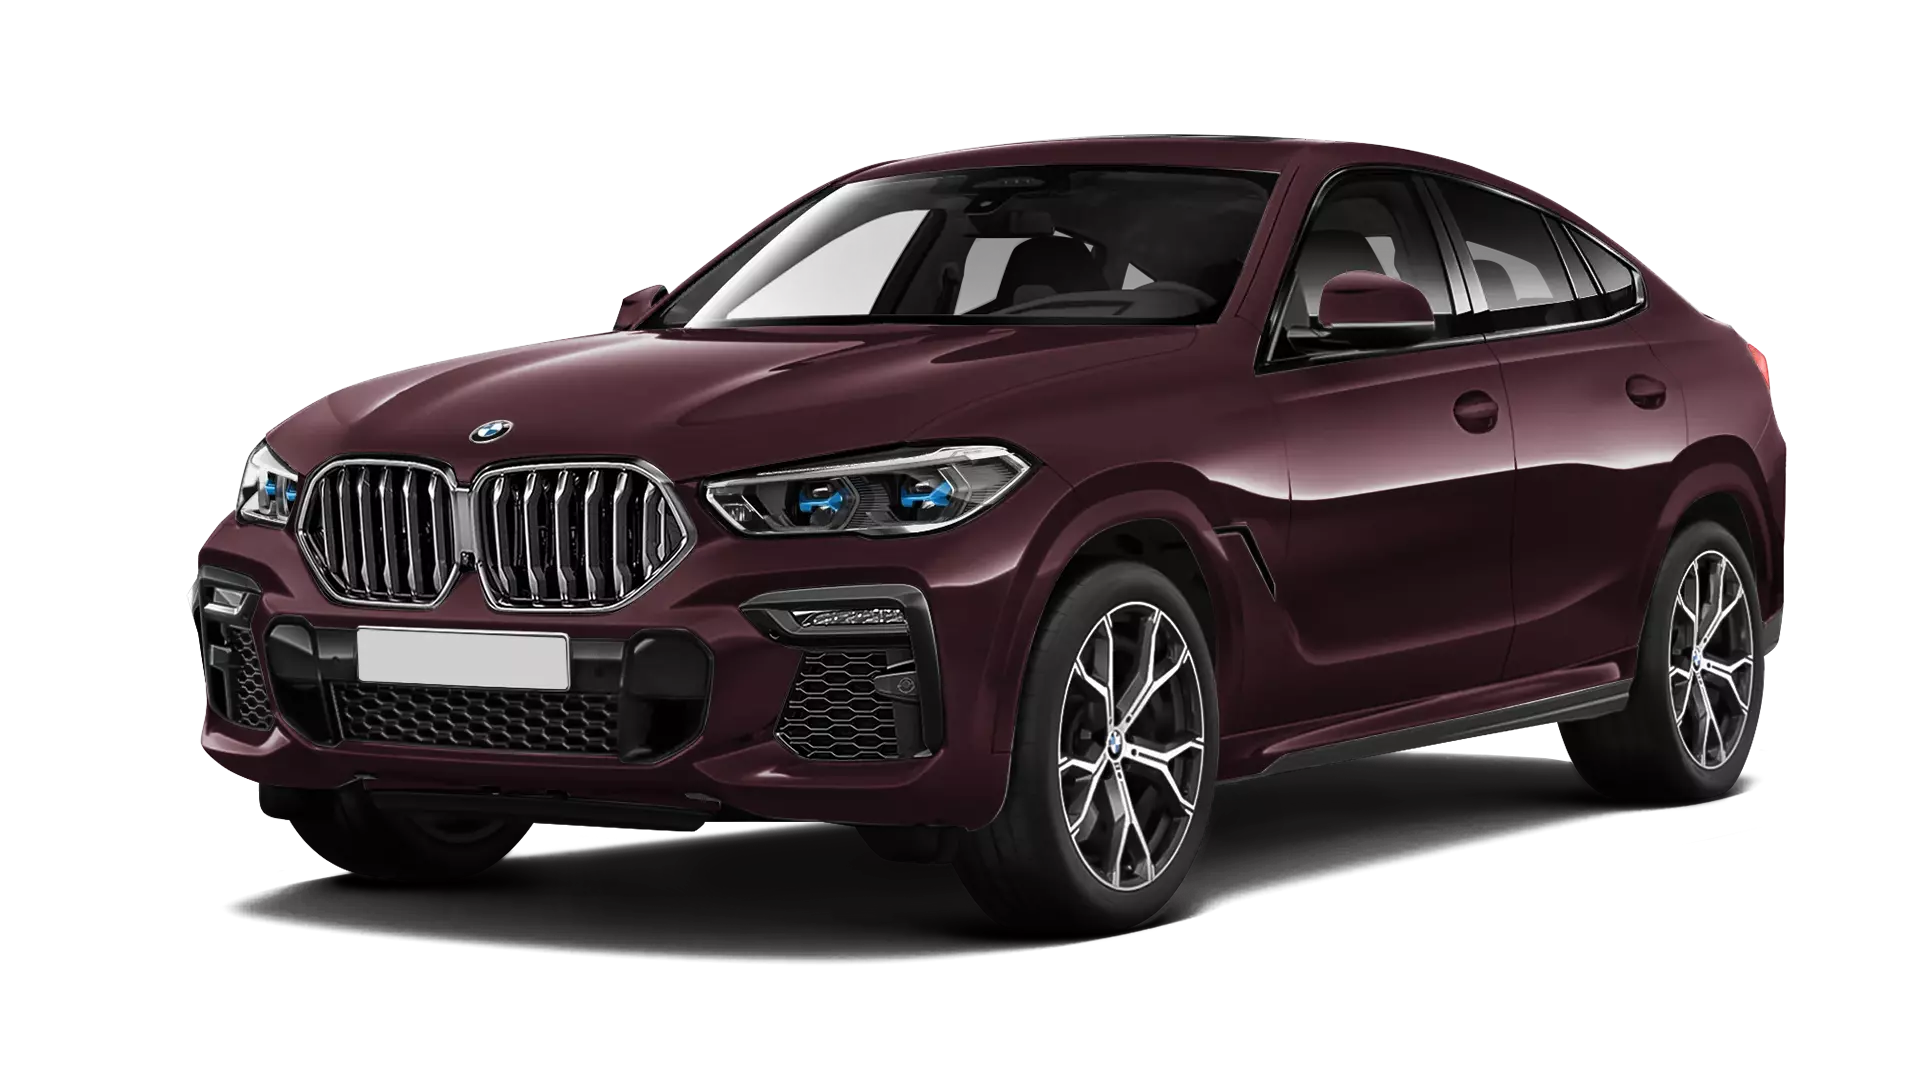 BMW X6 stock front view in ametrine